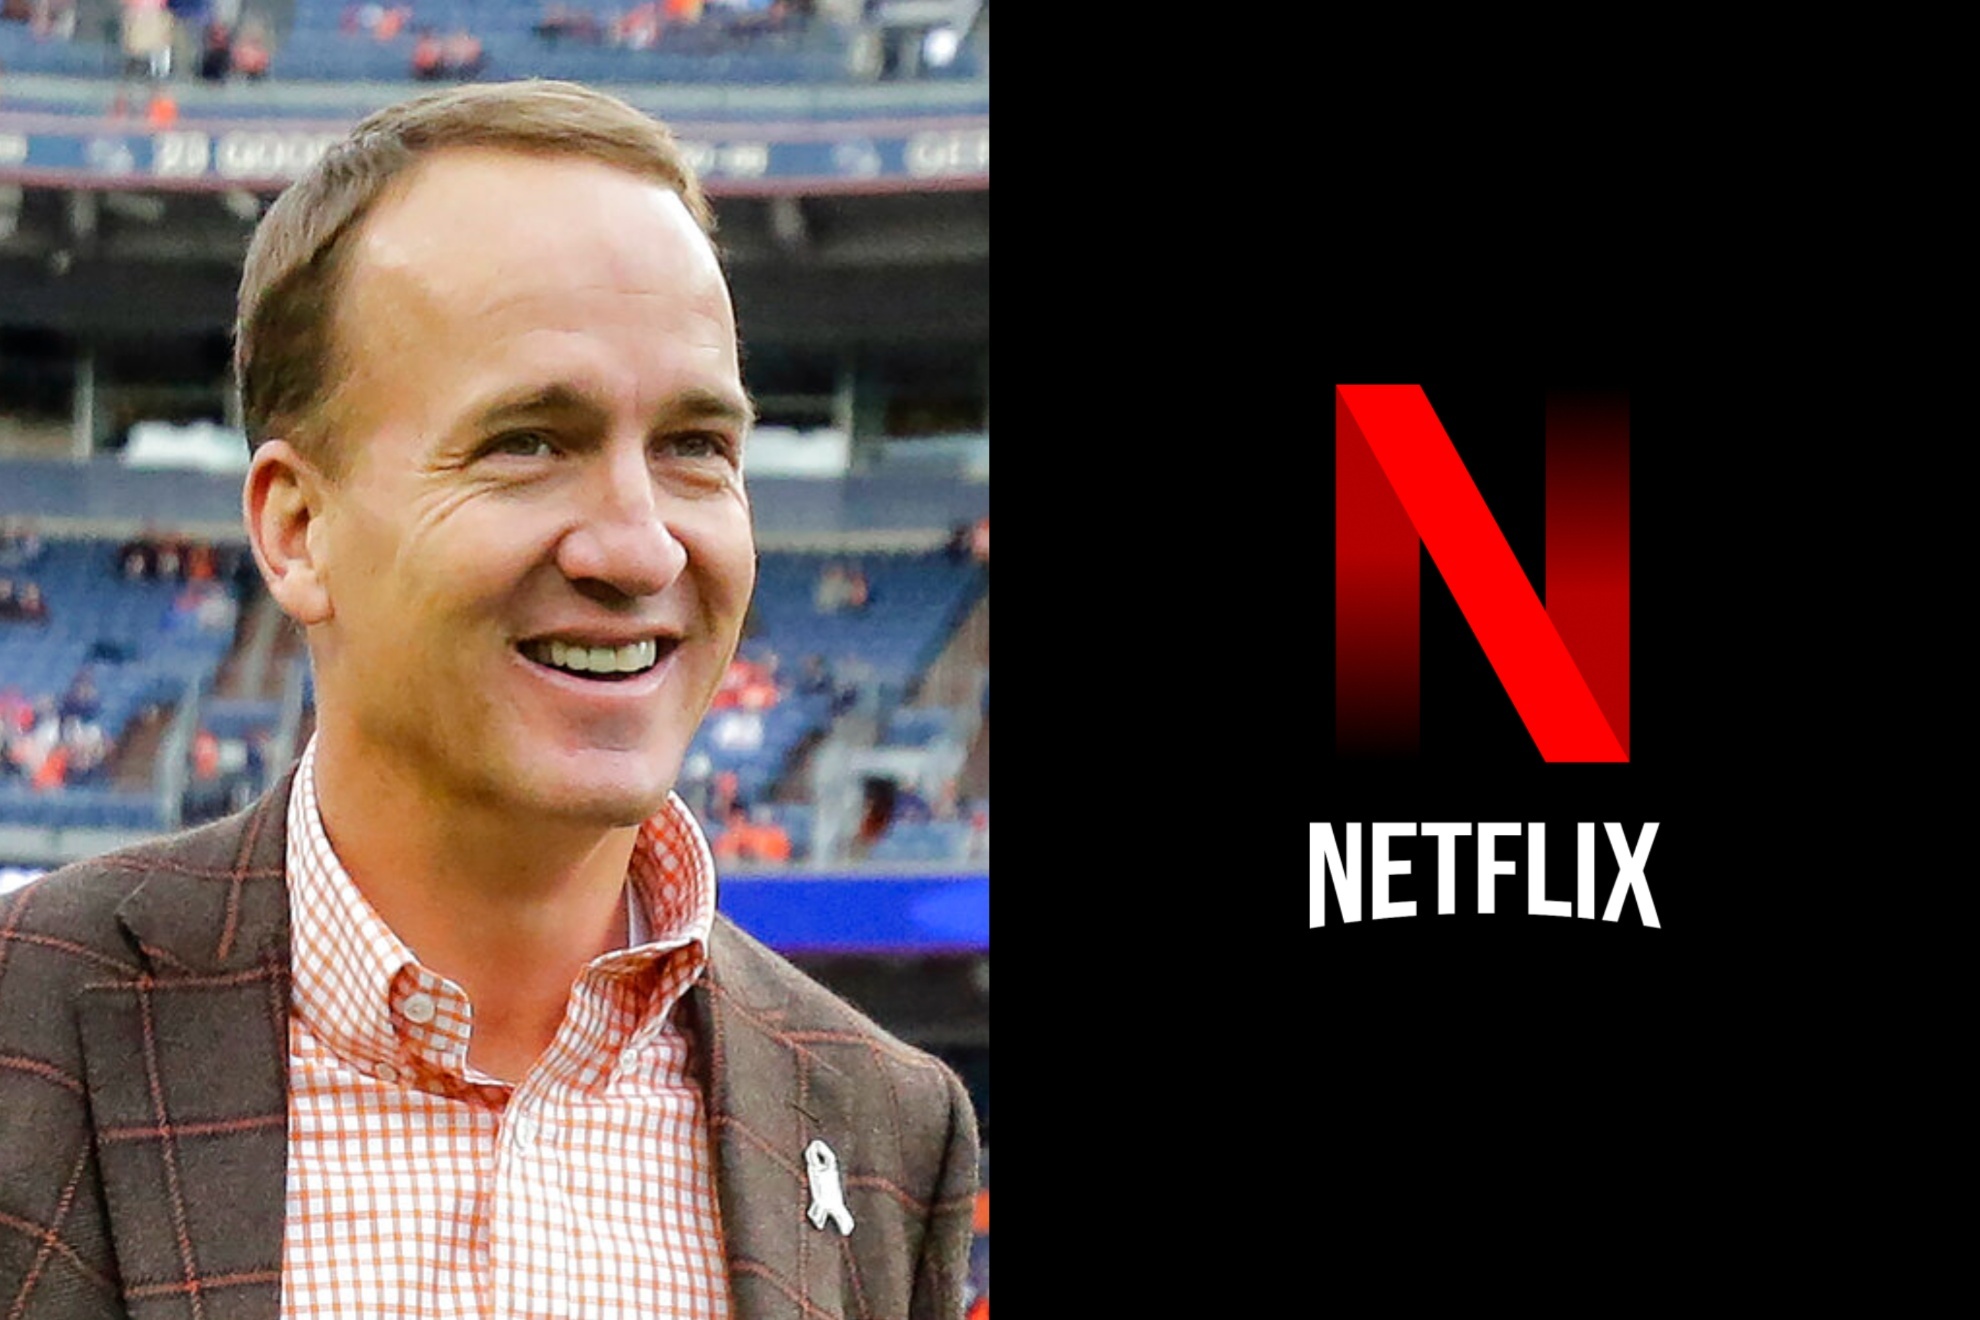 Peyton Manning & Netflix's 'Quarterback' will give viewers unprecedented access into the lives of NFL Quarterbacks